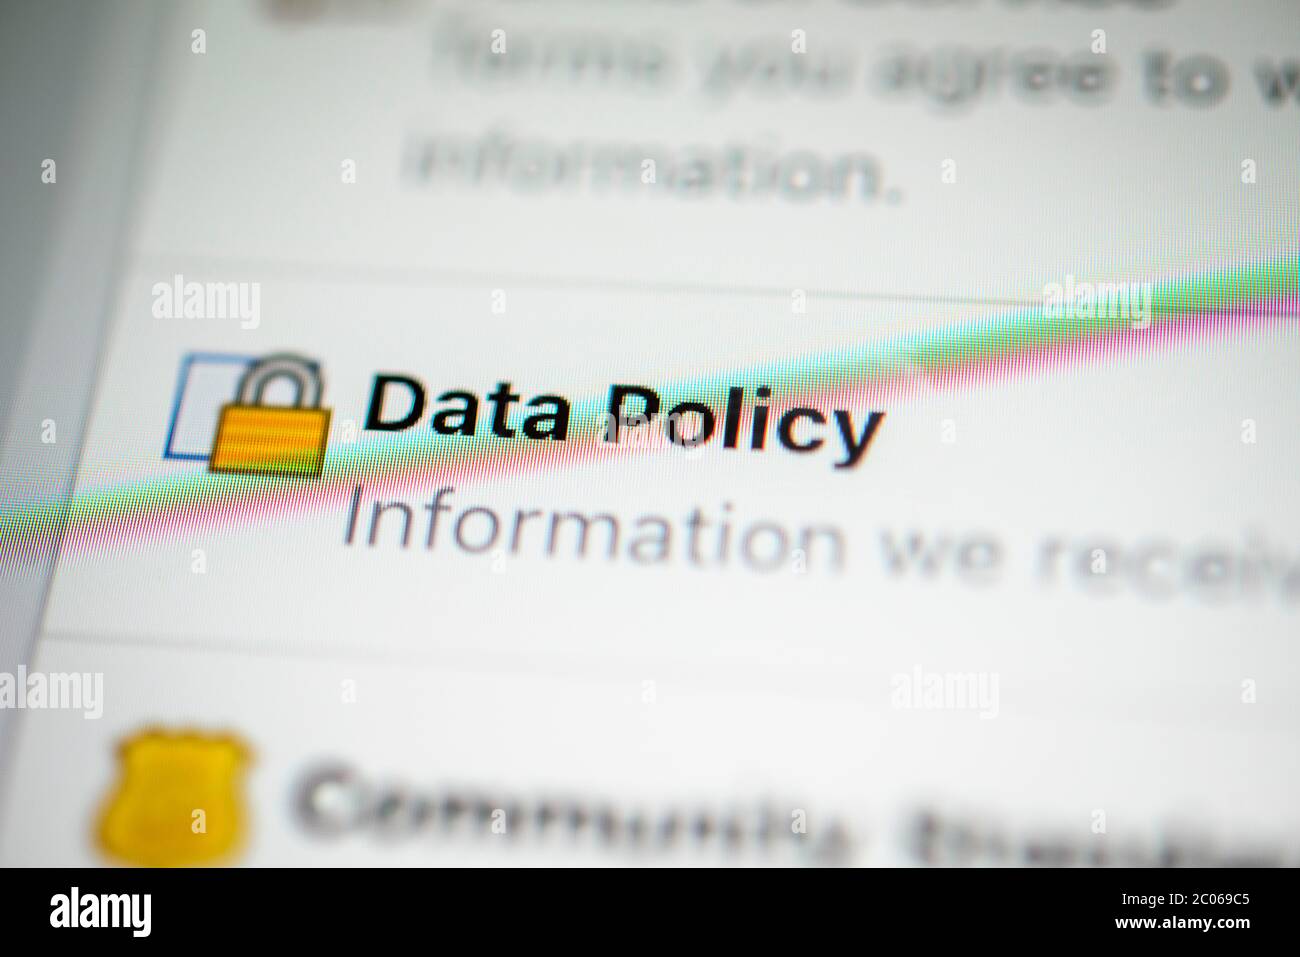 Facebook privacy settings, data policy, lettering, screenshot, smartphone, detail, full screen Stock Photo